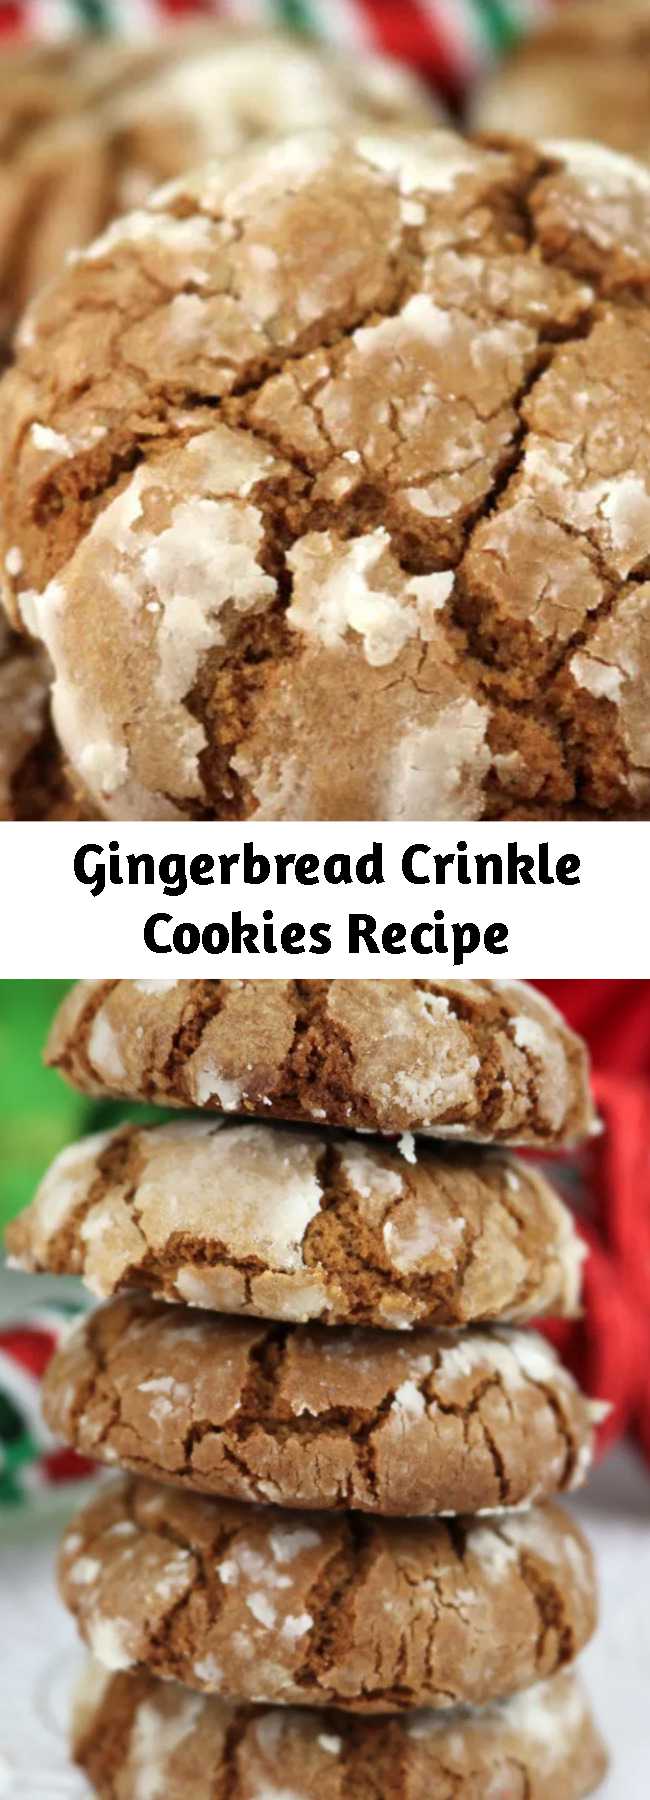 Gingerbread Crinkle Cookies Recipe - Gingerbread Crinkle Cookies - light, fluffy and spicy on the inside and sweet and crunchy on the outside is a delicious Christmas dessert. So easy to make, so delicious, so Christmas-y! You're definitely going to want to add this recipe to your Christmas desserts baking list! #ChristmasDesserts #EasyChristmasDessert #FunChristmasDessert